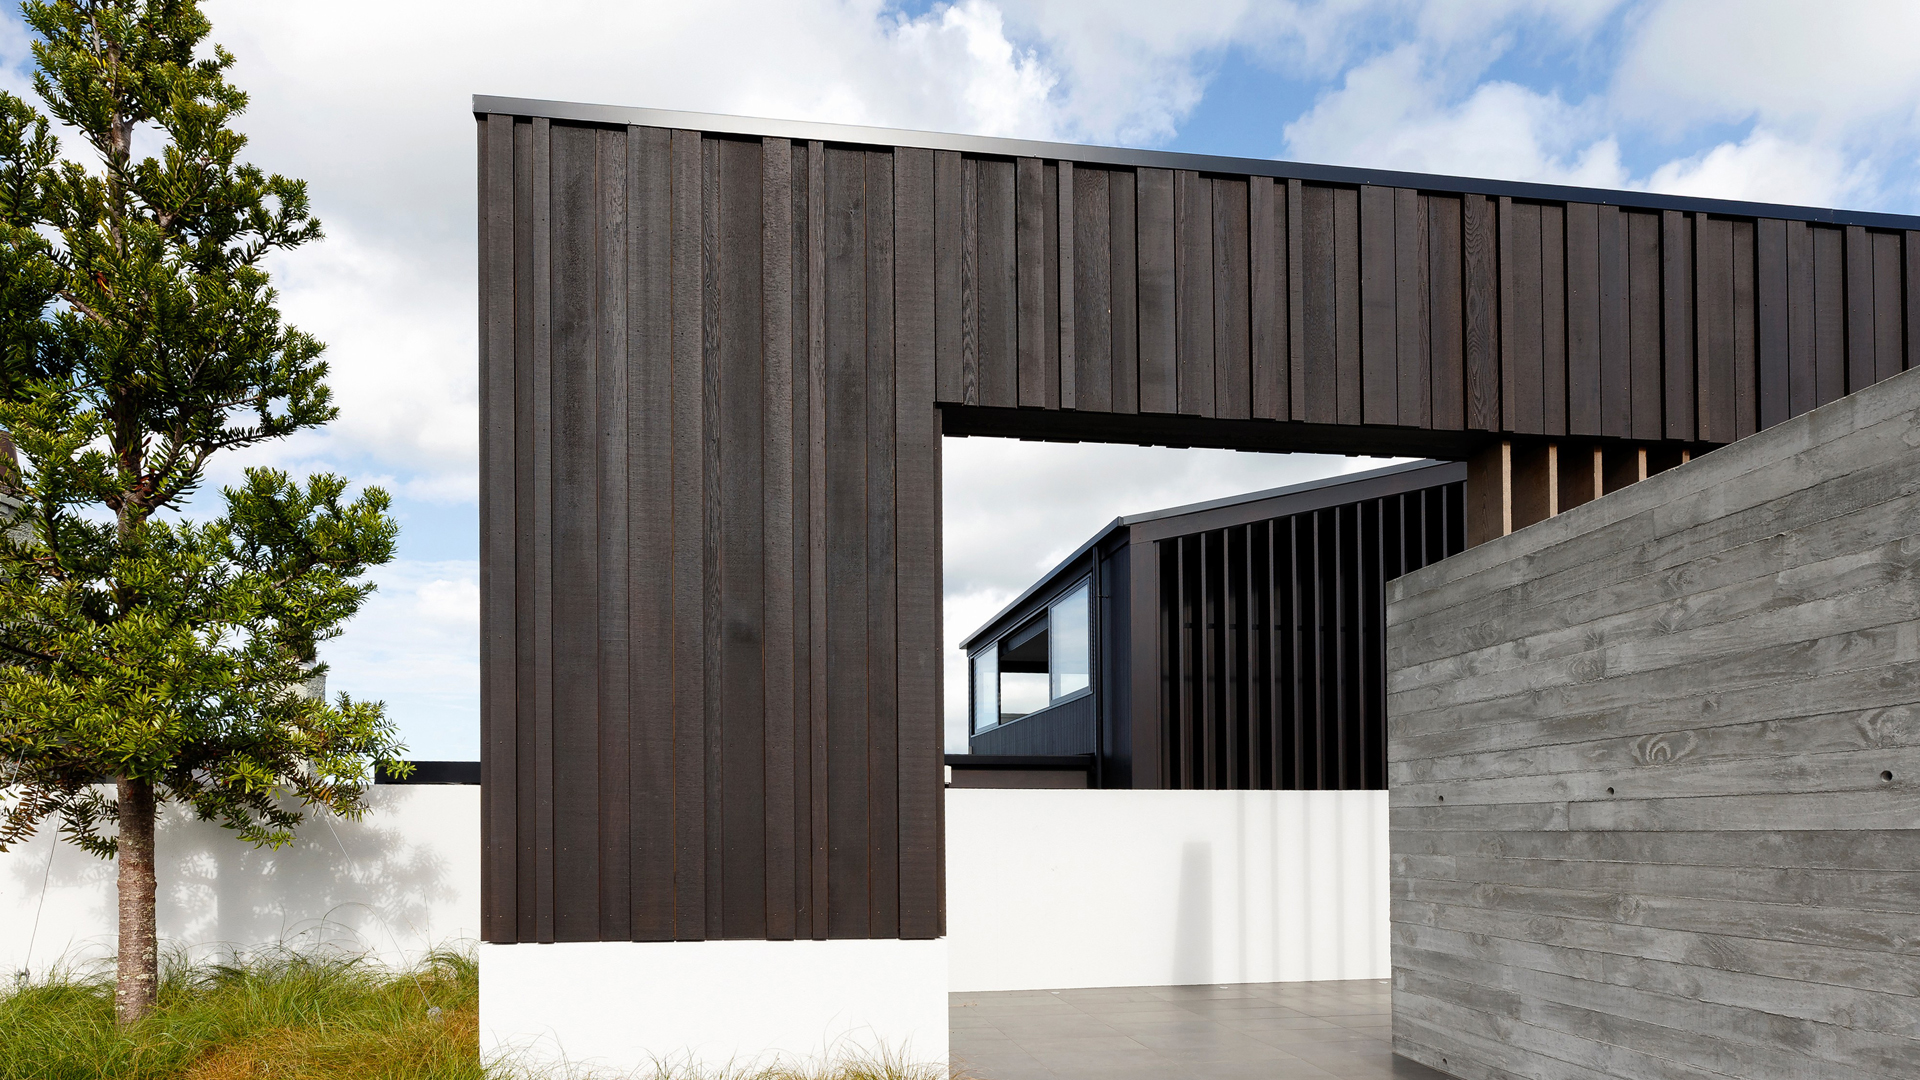 Northcote Point designed by Matz Architects